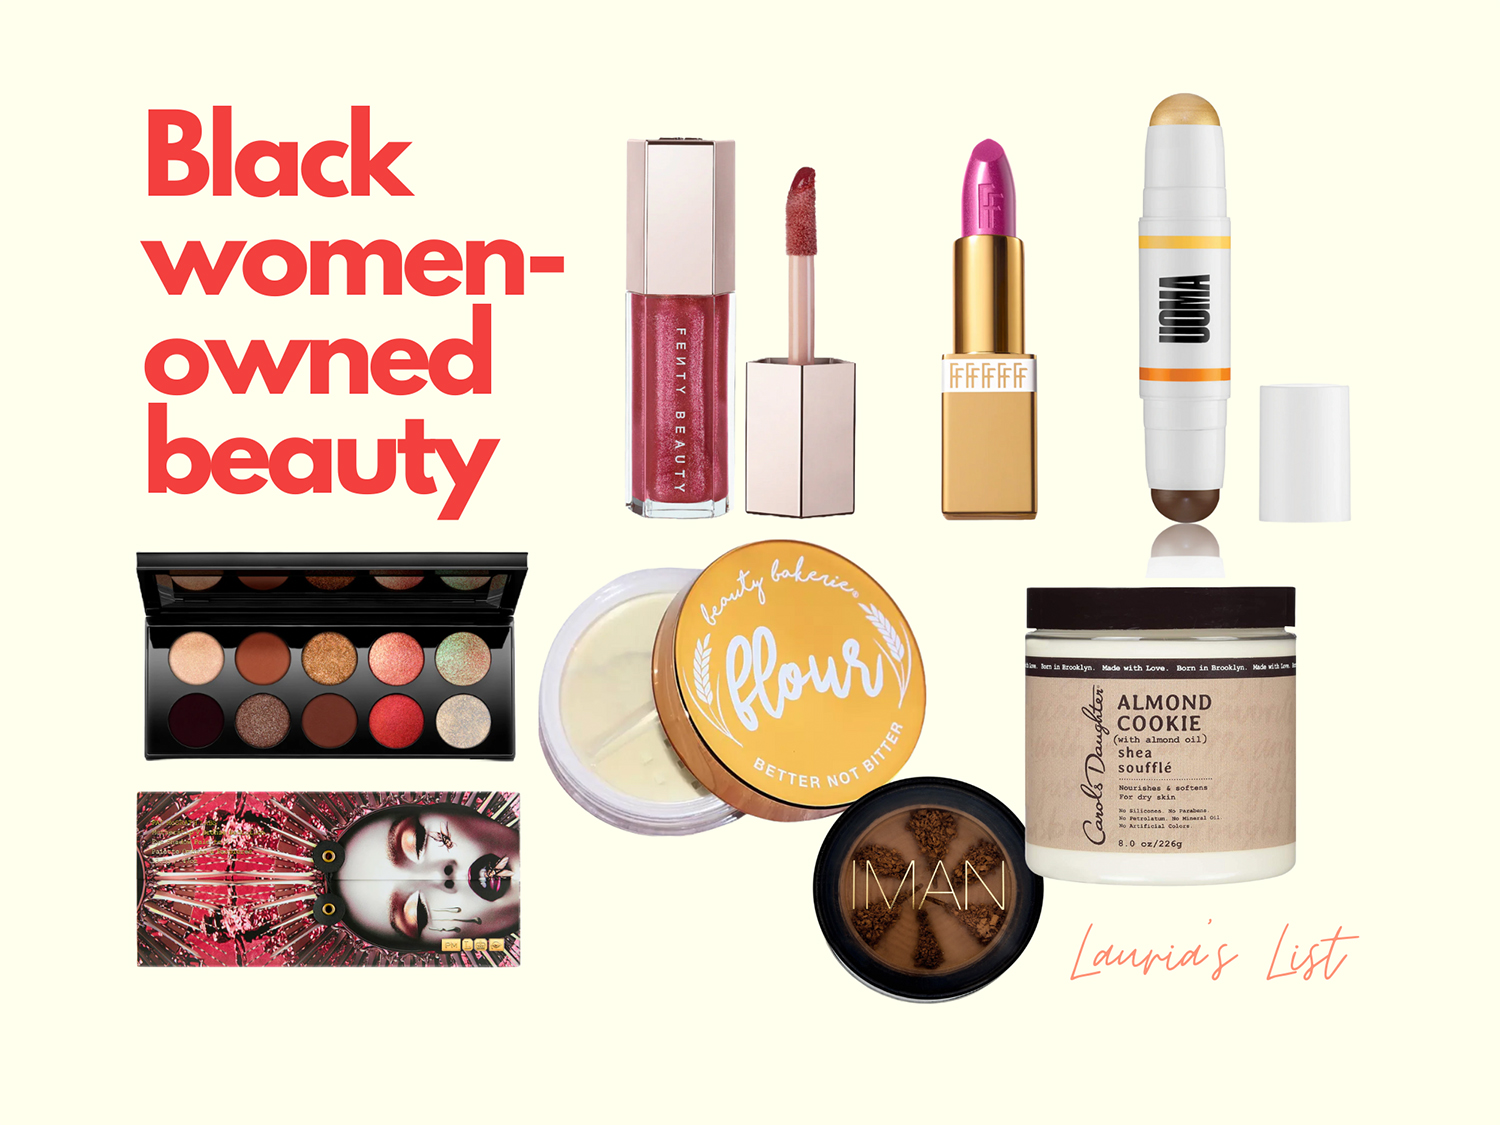 Collage of Black women-owned beauty brands